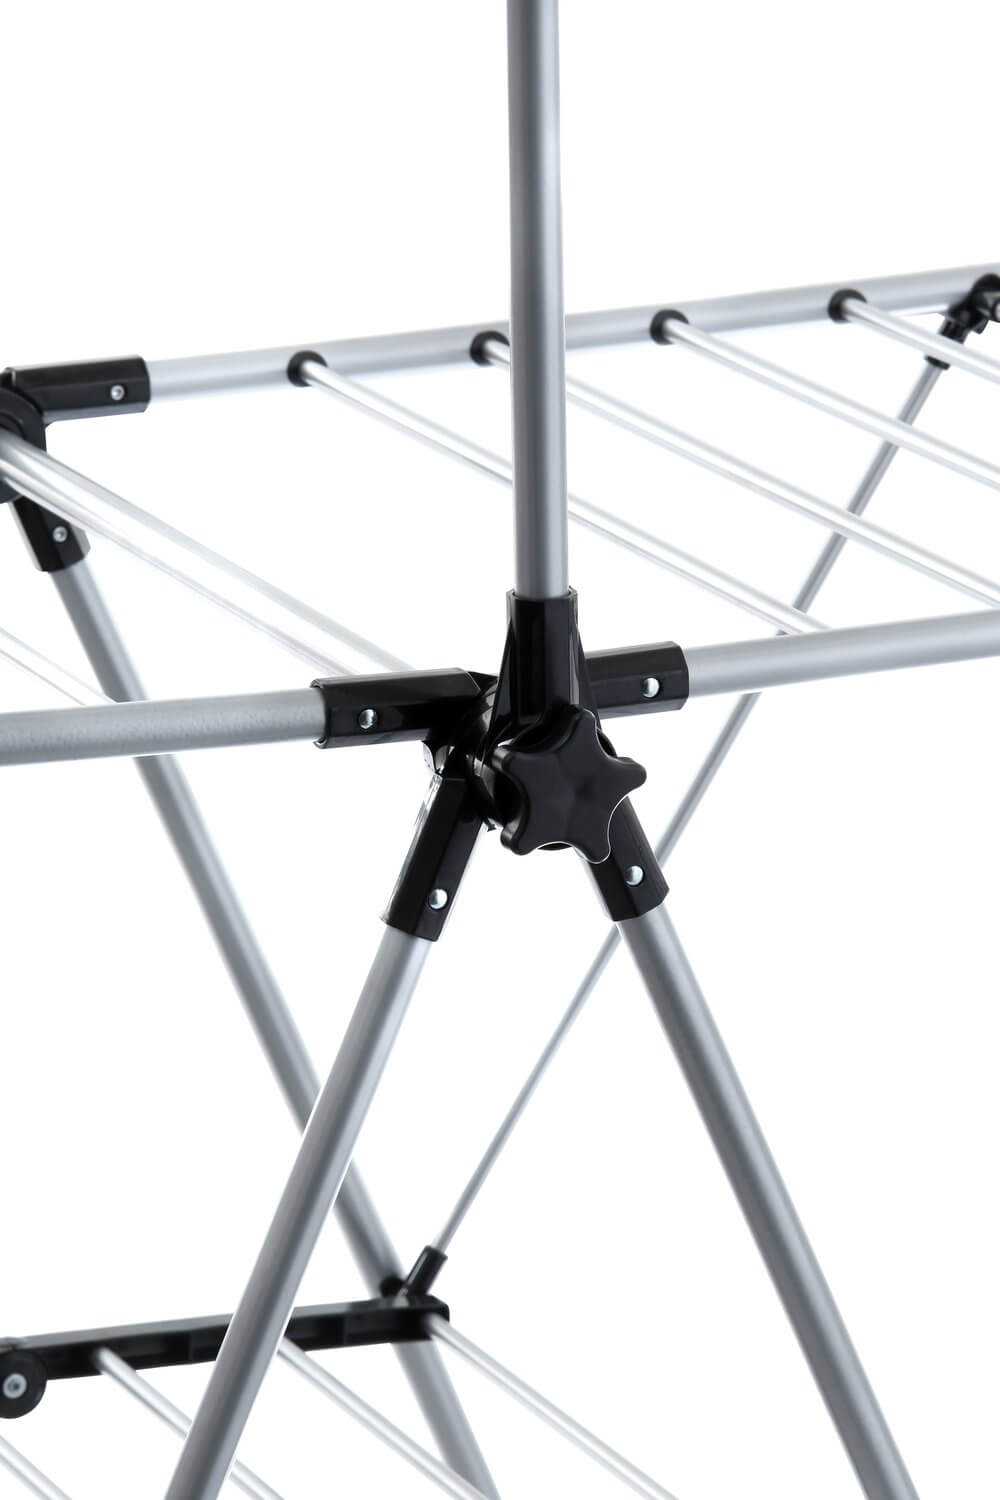 Deluxe A-Frame Clothes Airer with Top Hanging Rail Grey - LAUNDRY - Airers - Soko and Co